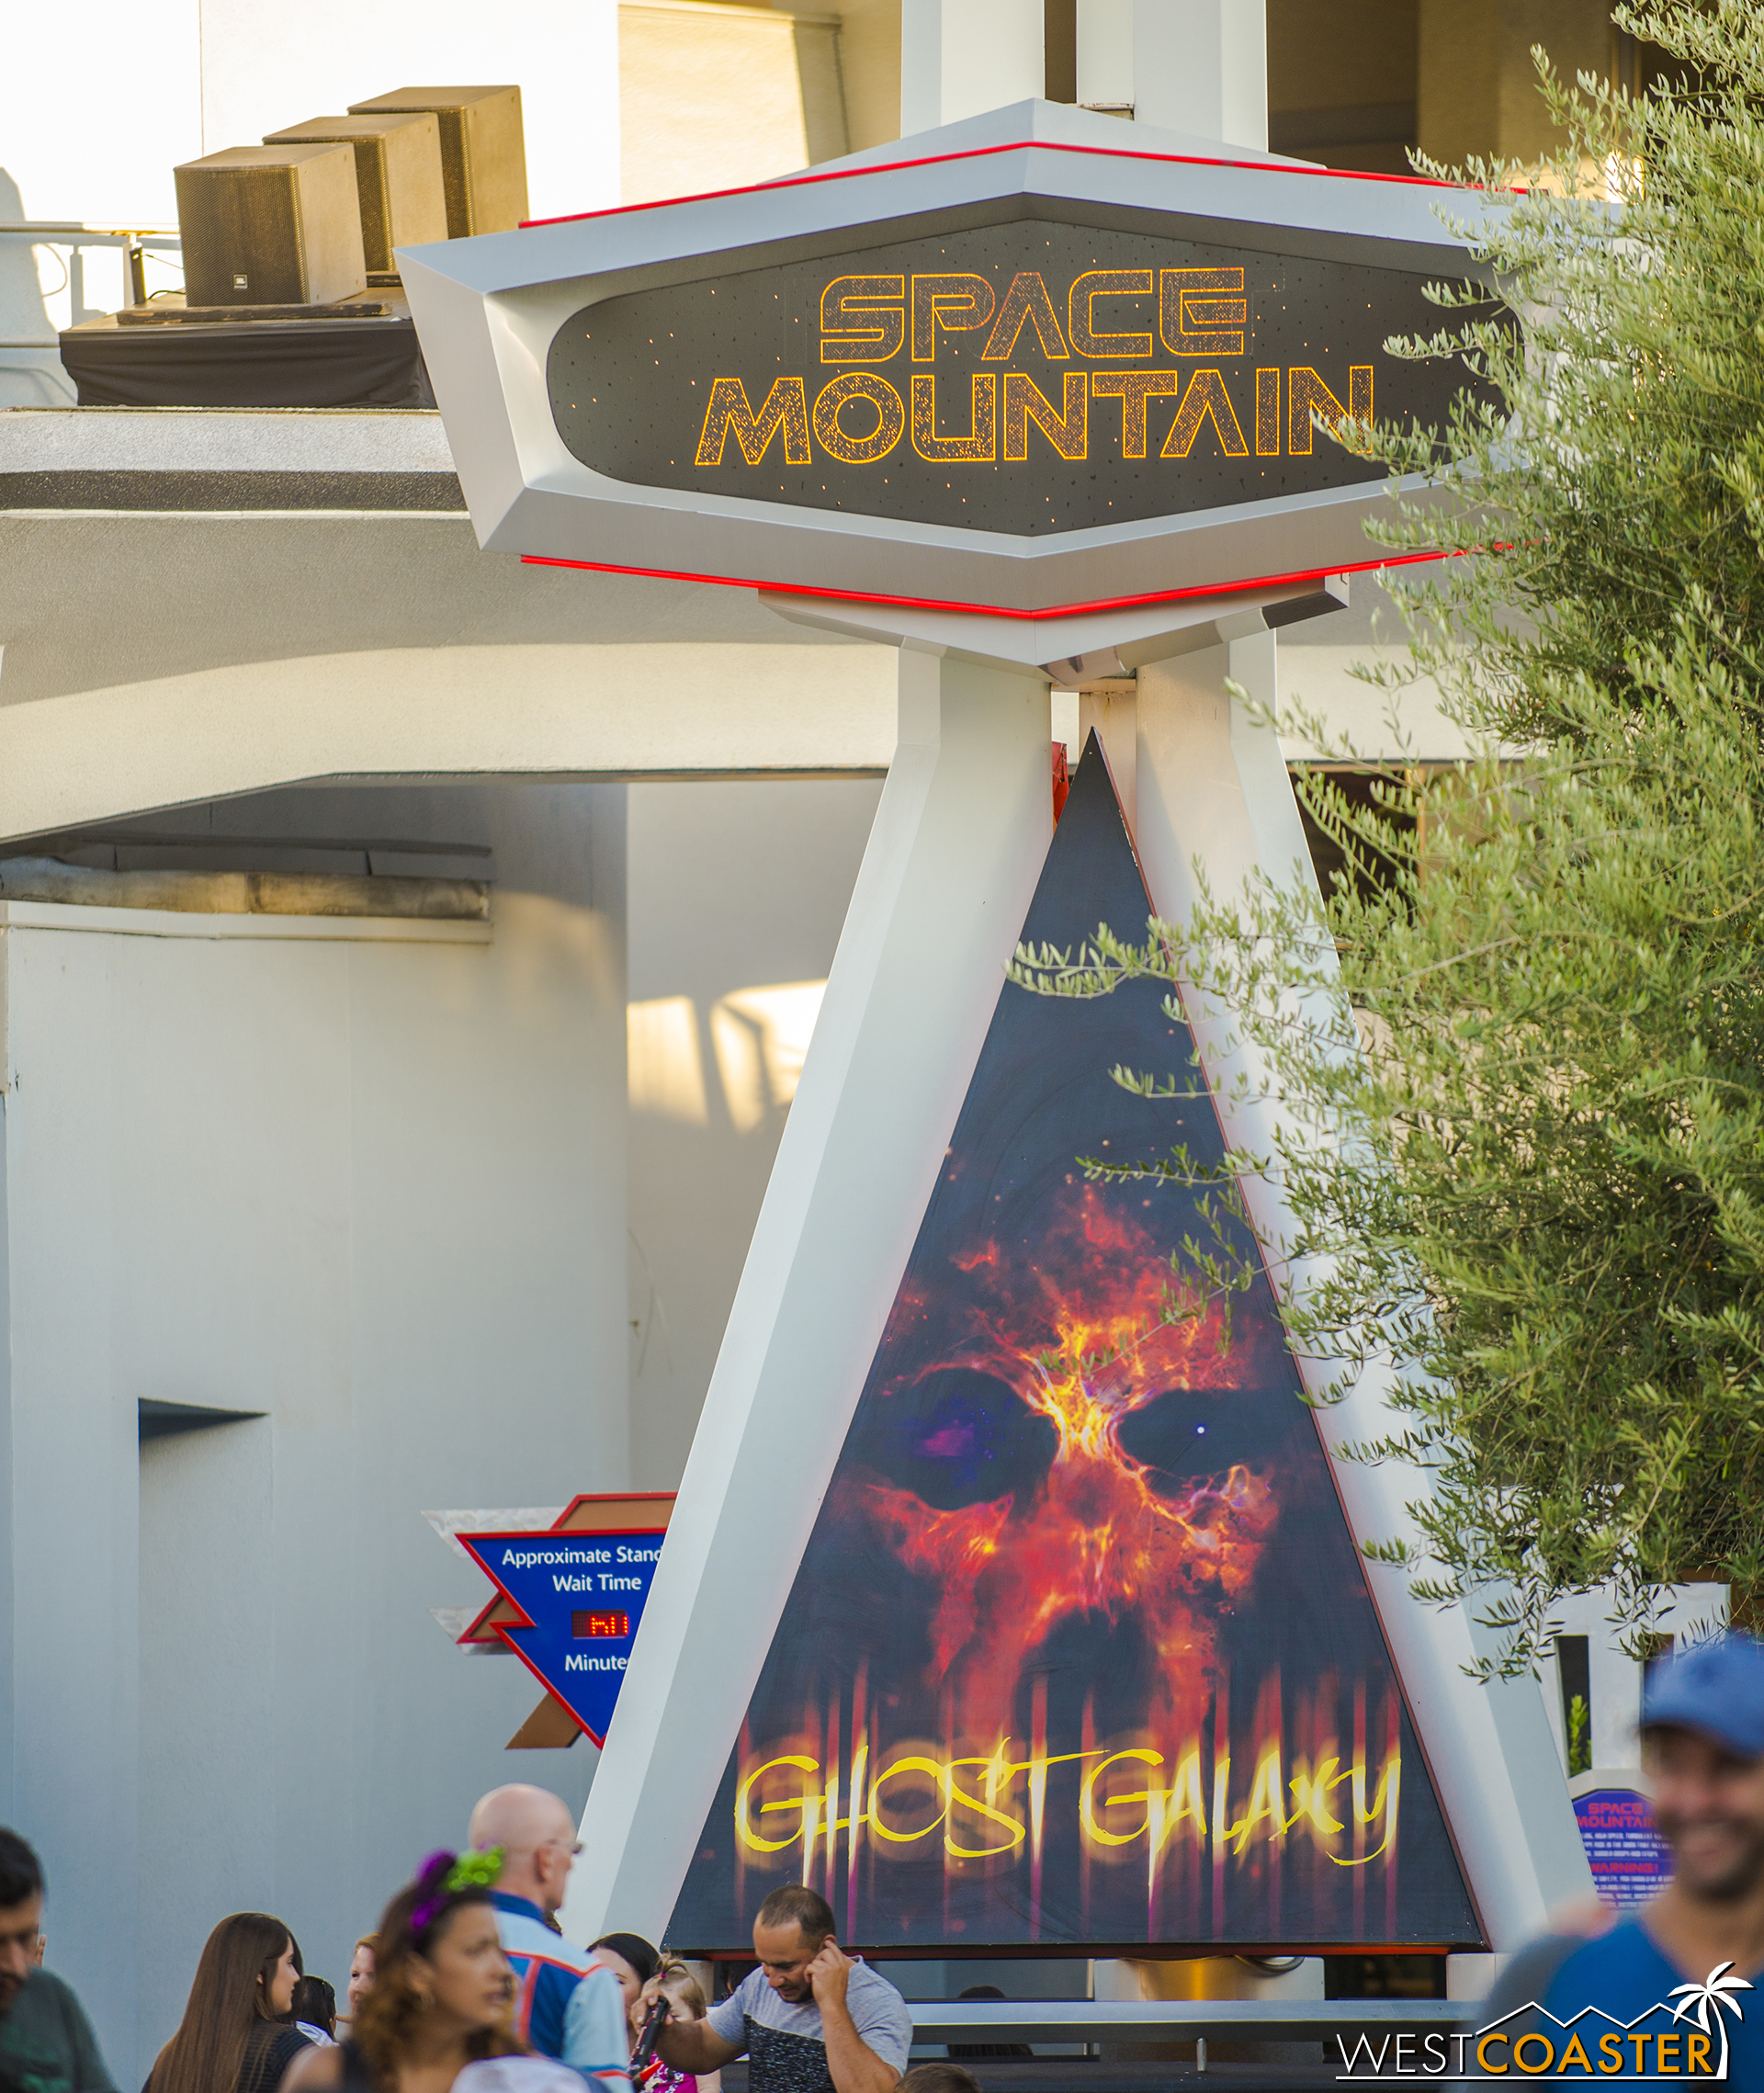  Just without Hyperspace Mountain, which has lost the Star Wars and gained an intergalactic spectre again. 